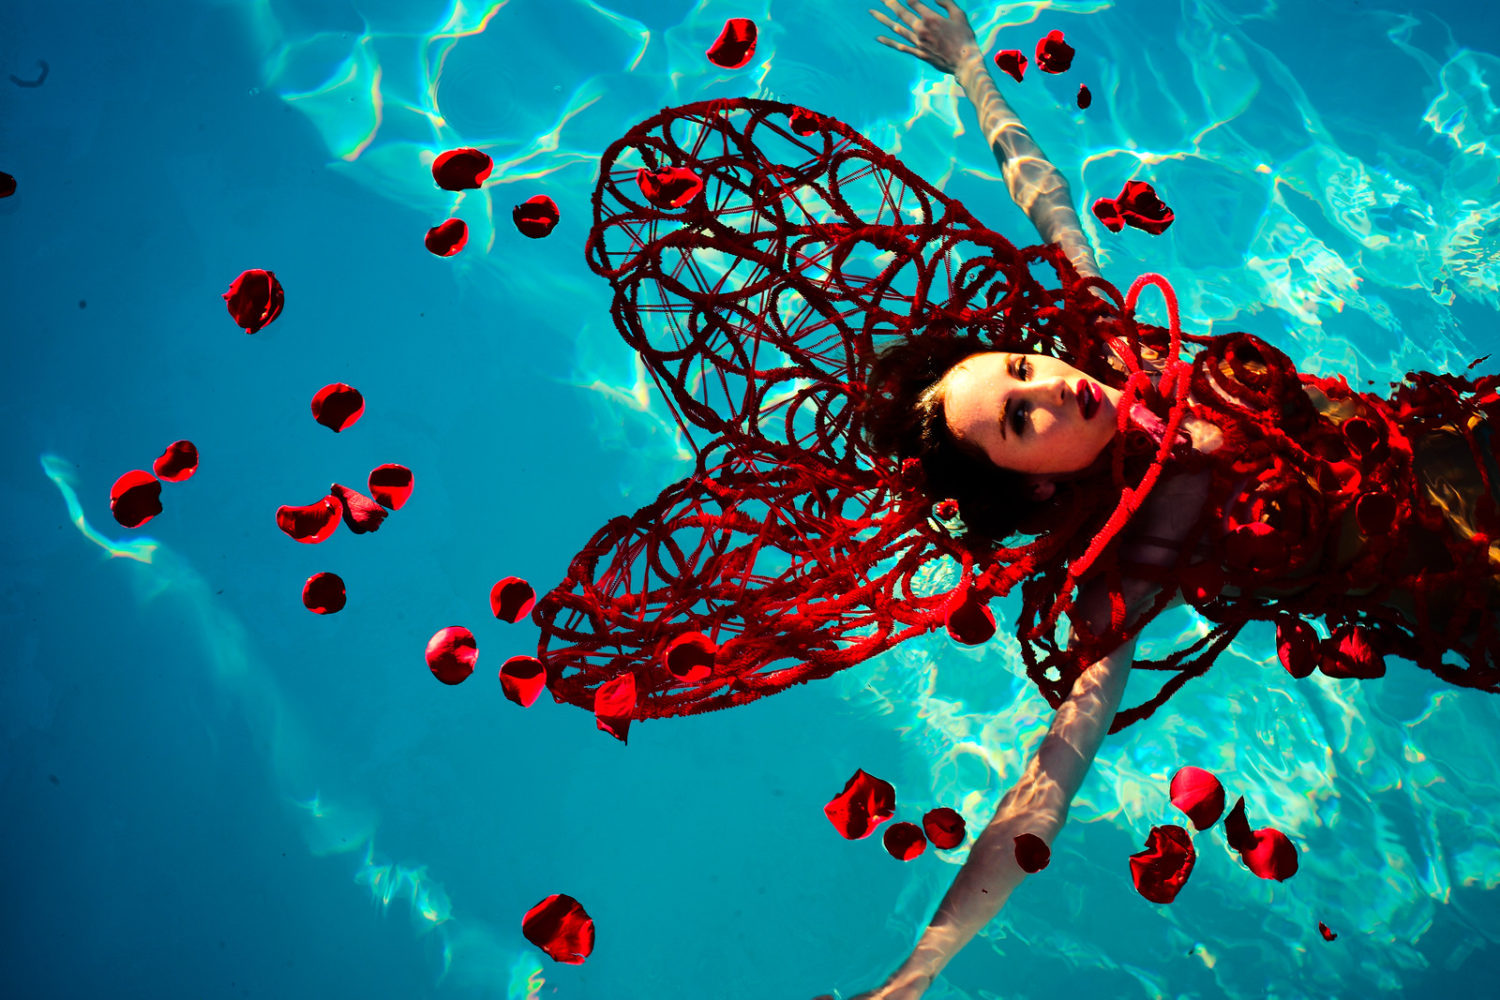 Girl in red wings and costume floating in a pool with arms stretched wide and rose petals scattered and floating around her